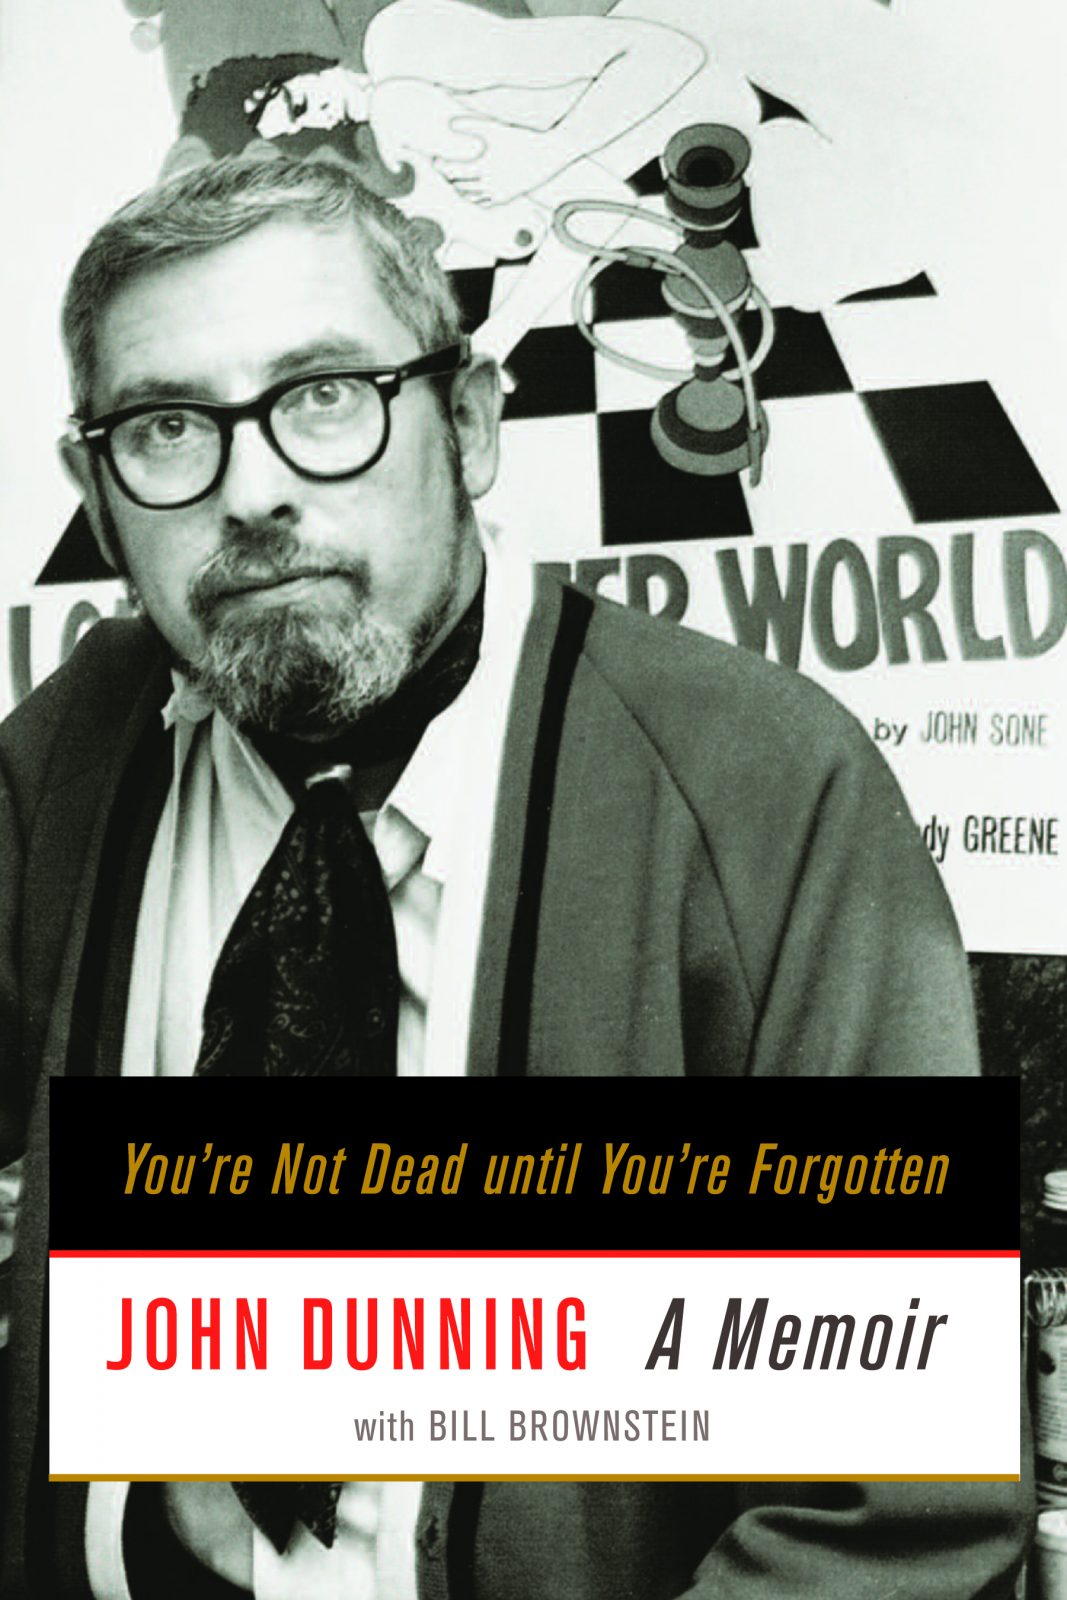 You're Not Dead until You're Forgotten, by John Dunning